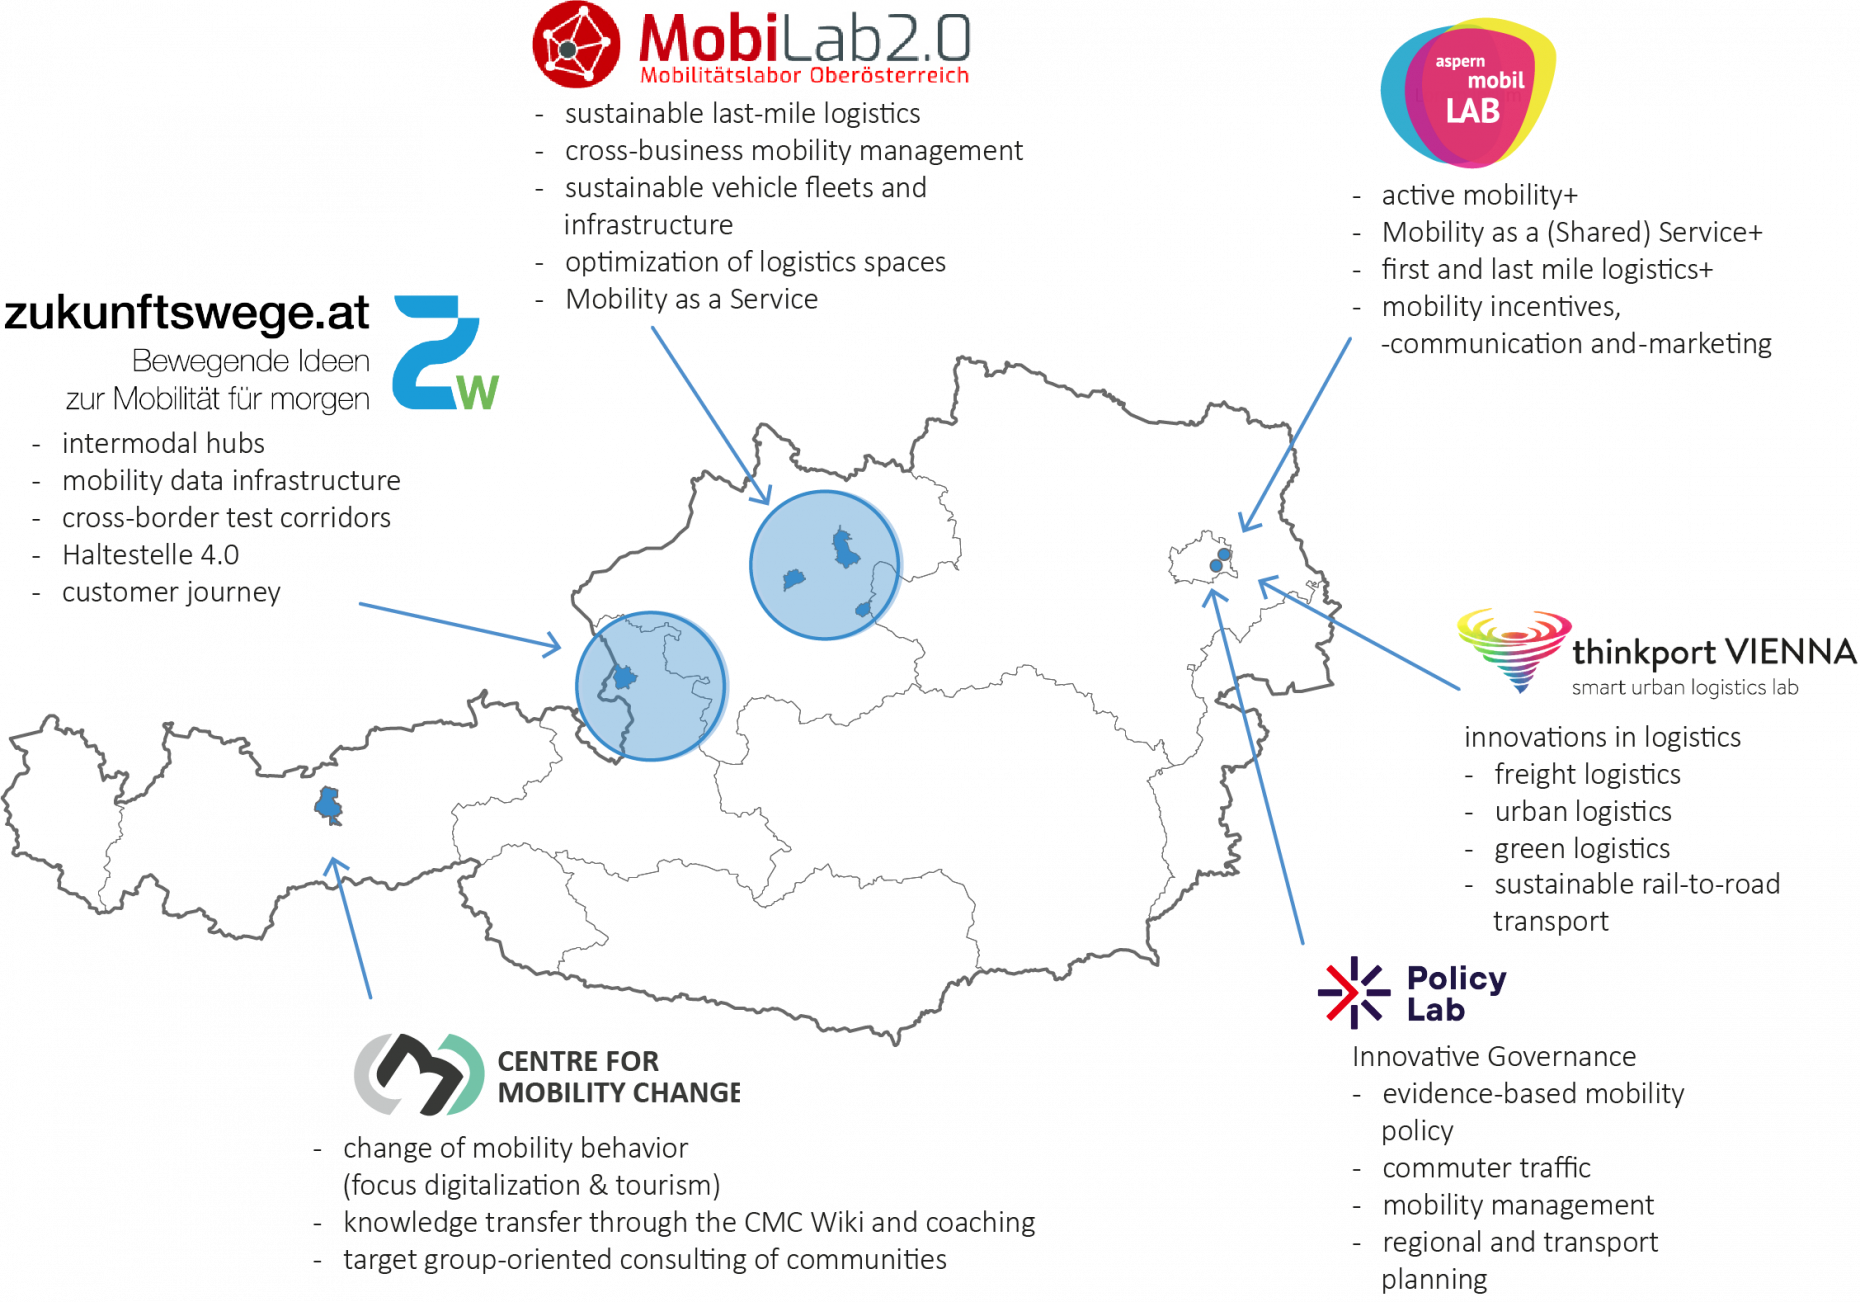 The image shows a map of Austria in which the four urban mobility labs, the Center for Mobility Change and the Policy-Lab.at are located. The main topics of the individual mobility labs are also shown.